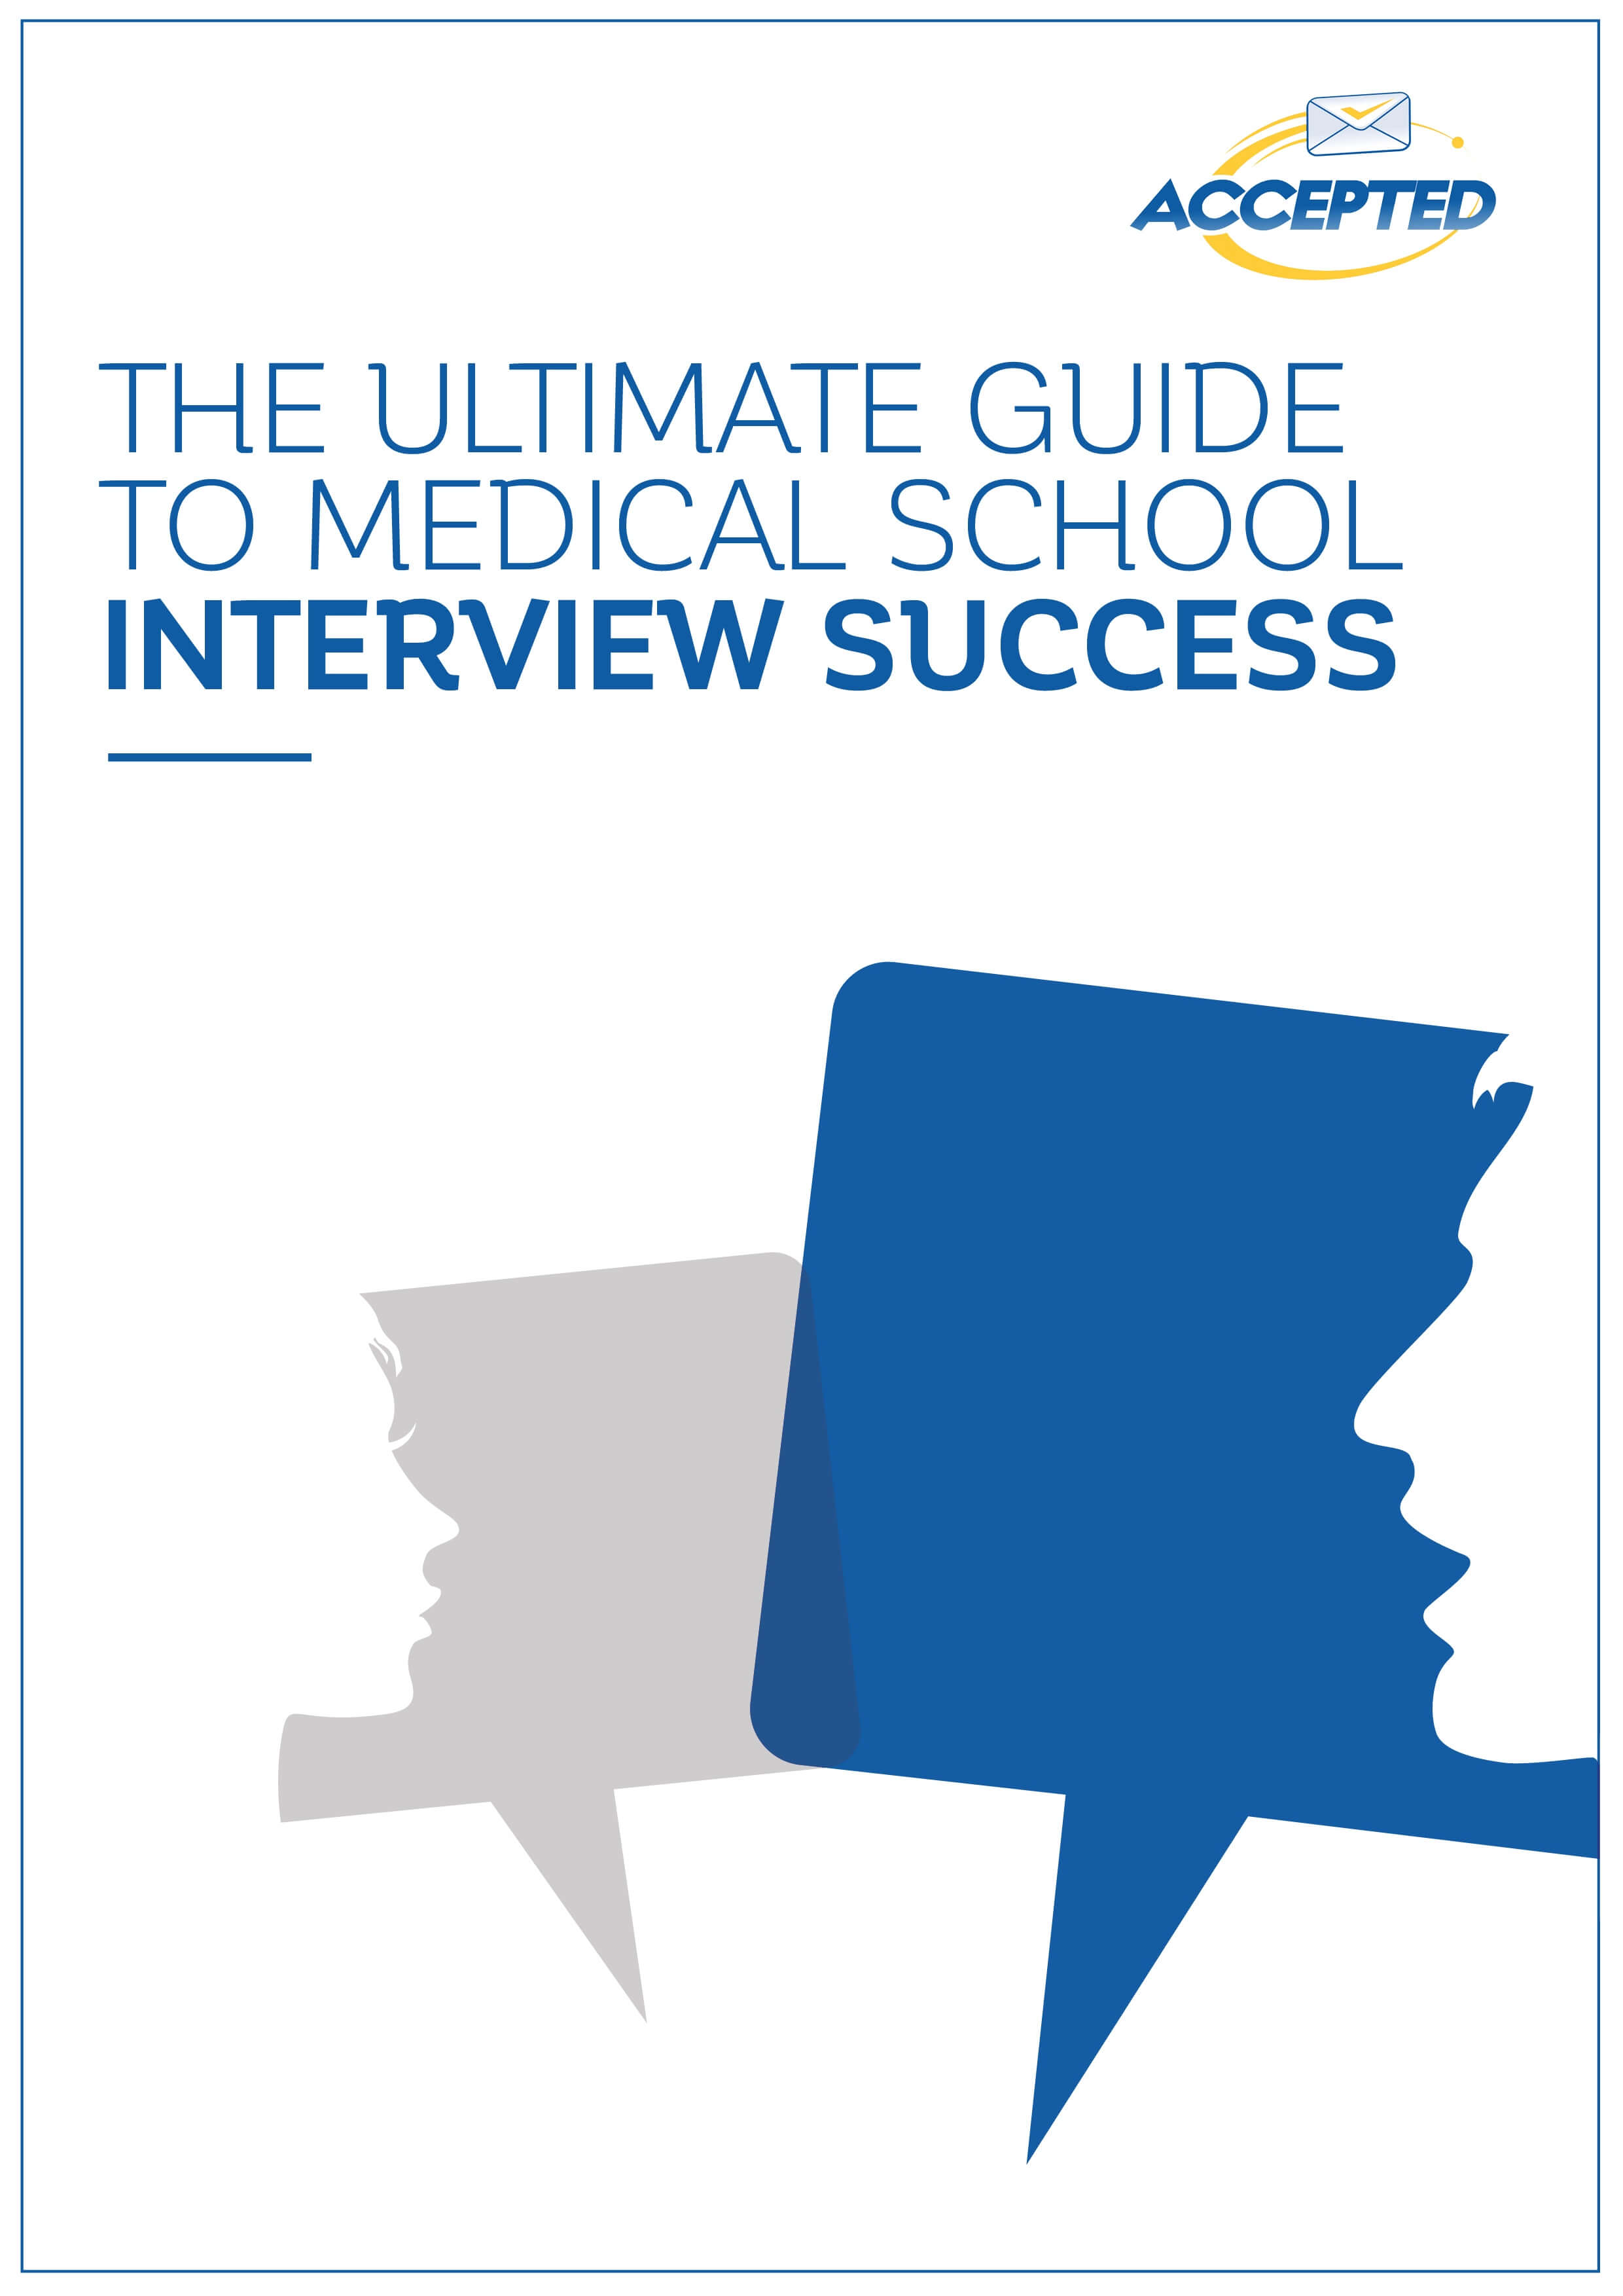 The Ultimate Guide to Medical School Interview Success